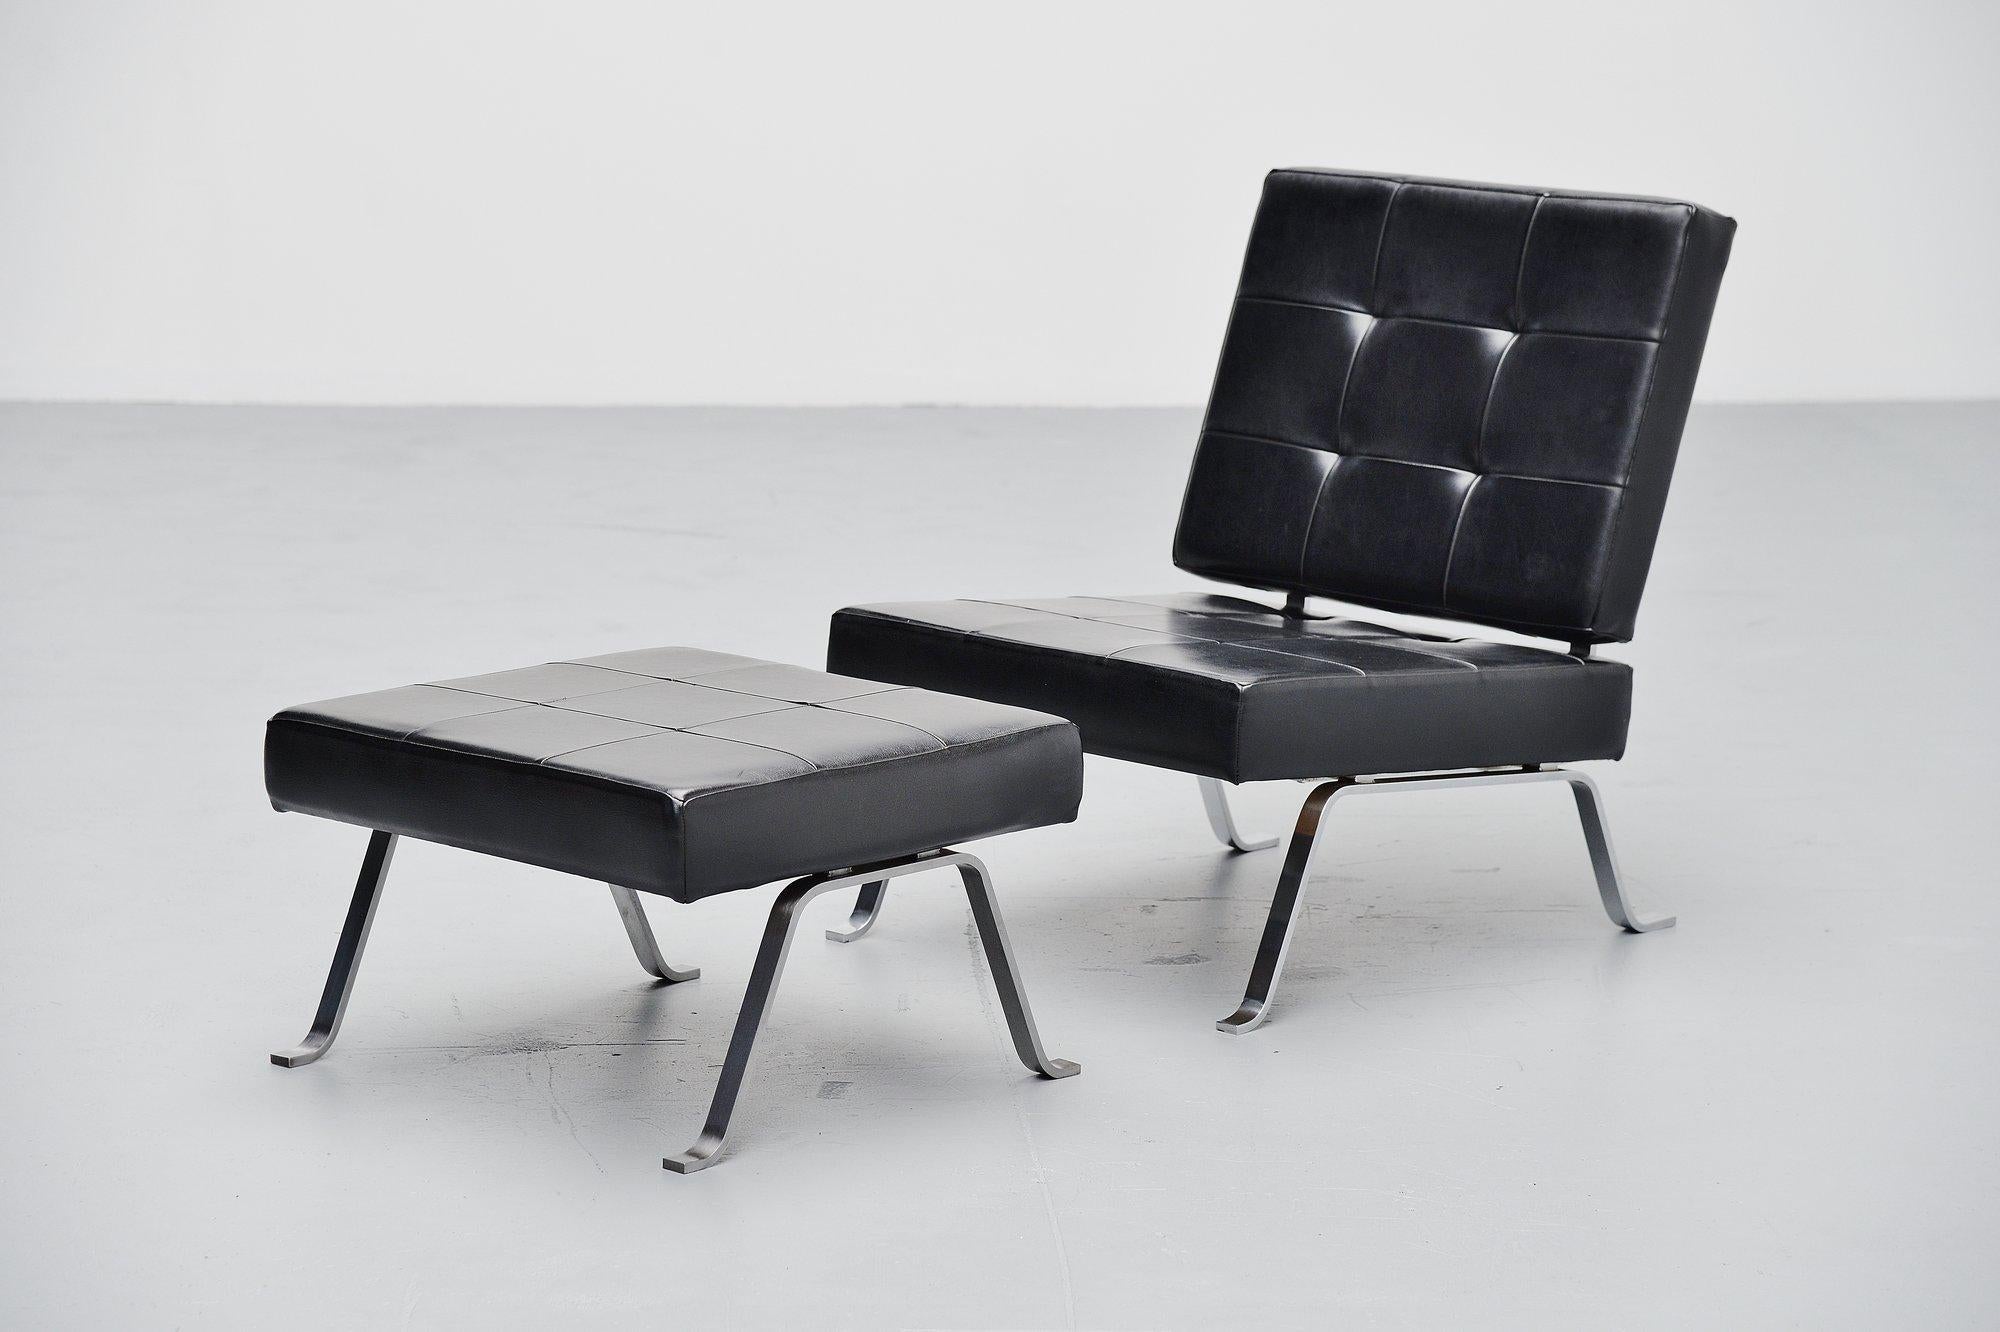 Very nice lounge chair and ottoman model AP60 designed by Hein Salomonson for AP Original (Polak), Holland 1960. This lounge chair set has solid brushed steel legs and black faux leather. It’s a combination of the Barcelona chair by Ludwig Mies van